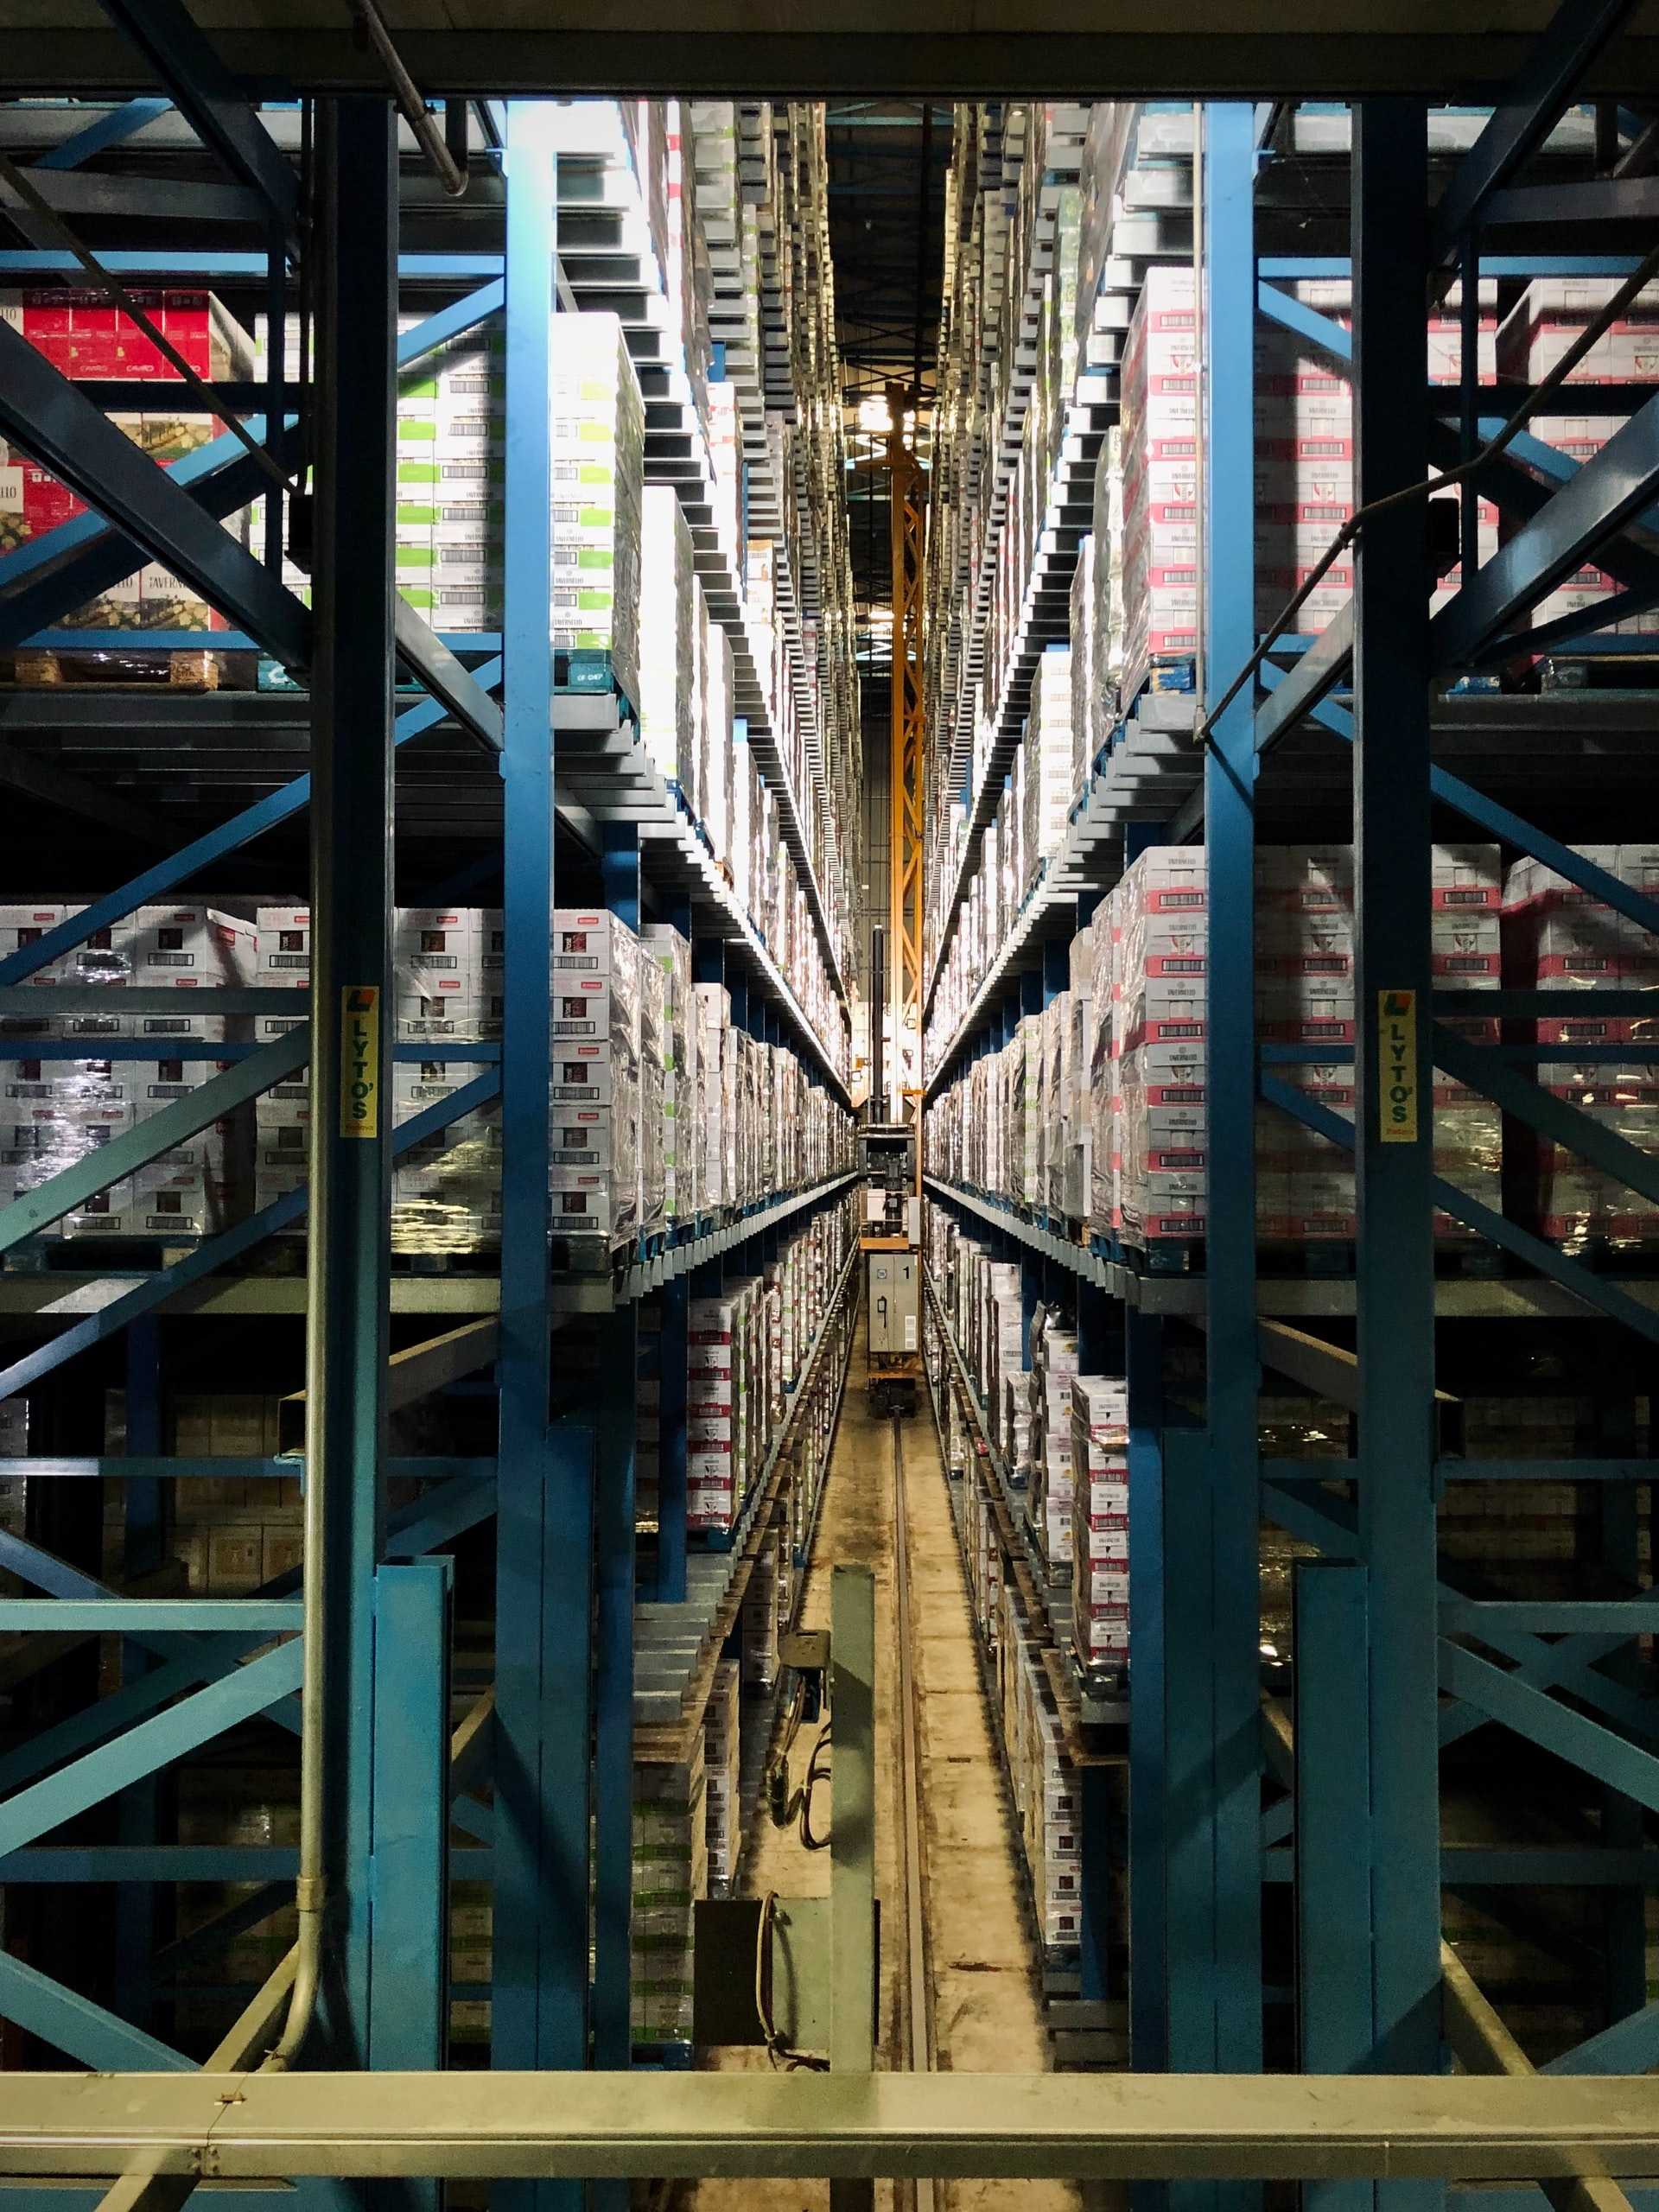 Goods are stacked high on shelves in a warehouse.